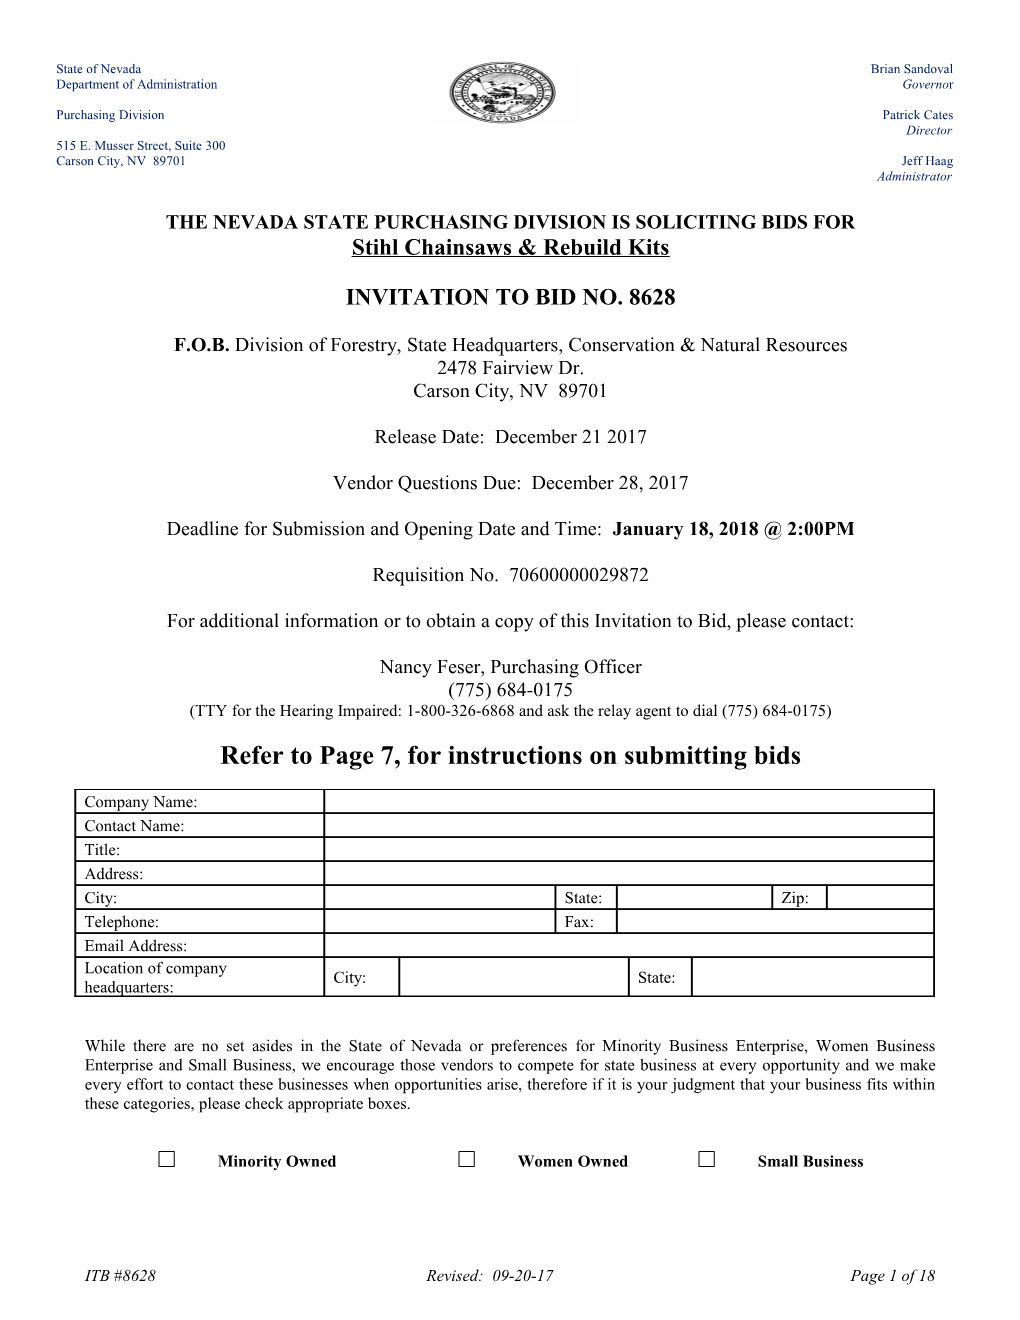 The Nevada State Purchasing Division Is Soliciting Bids For s2